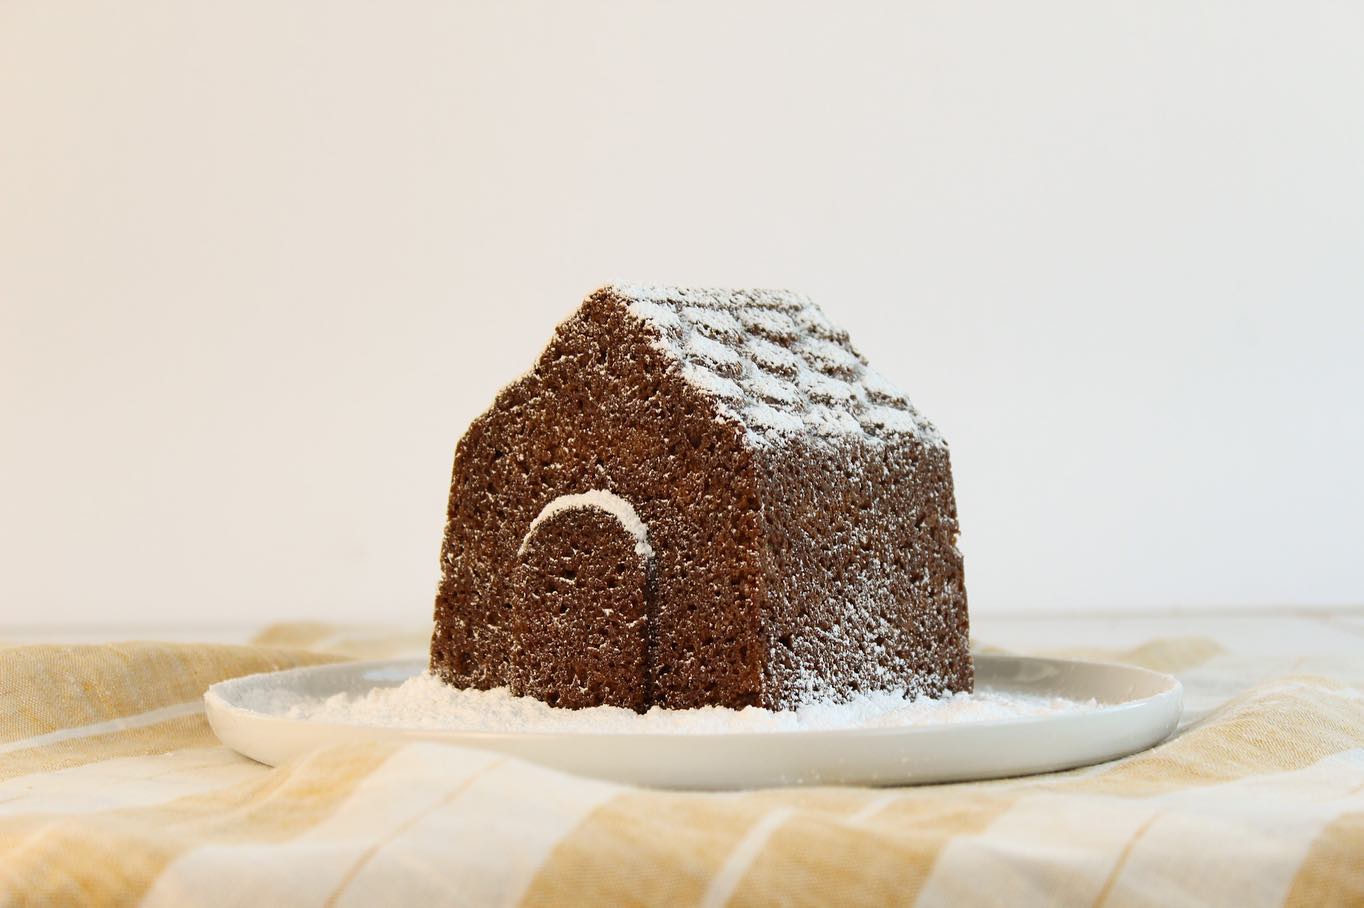 Tomte Cake – A Wholesome Gingerbread Adventure for Families